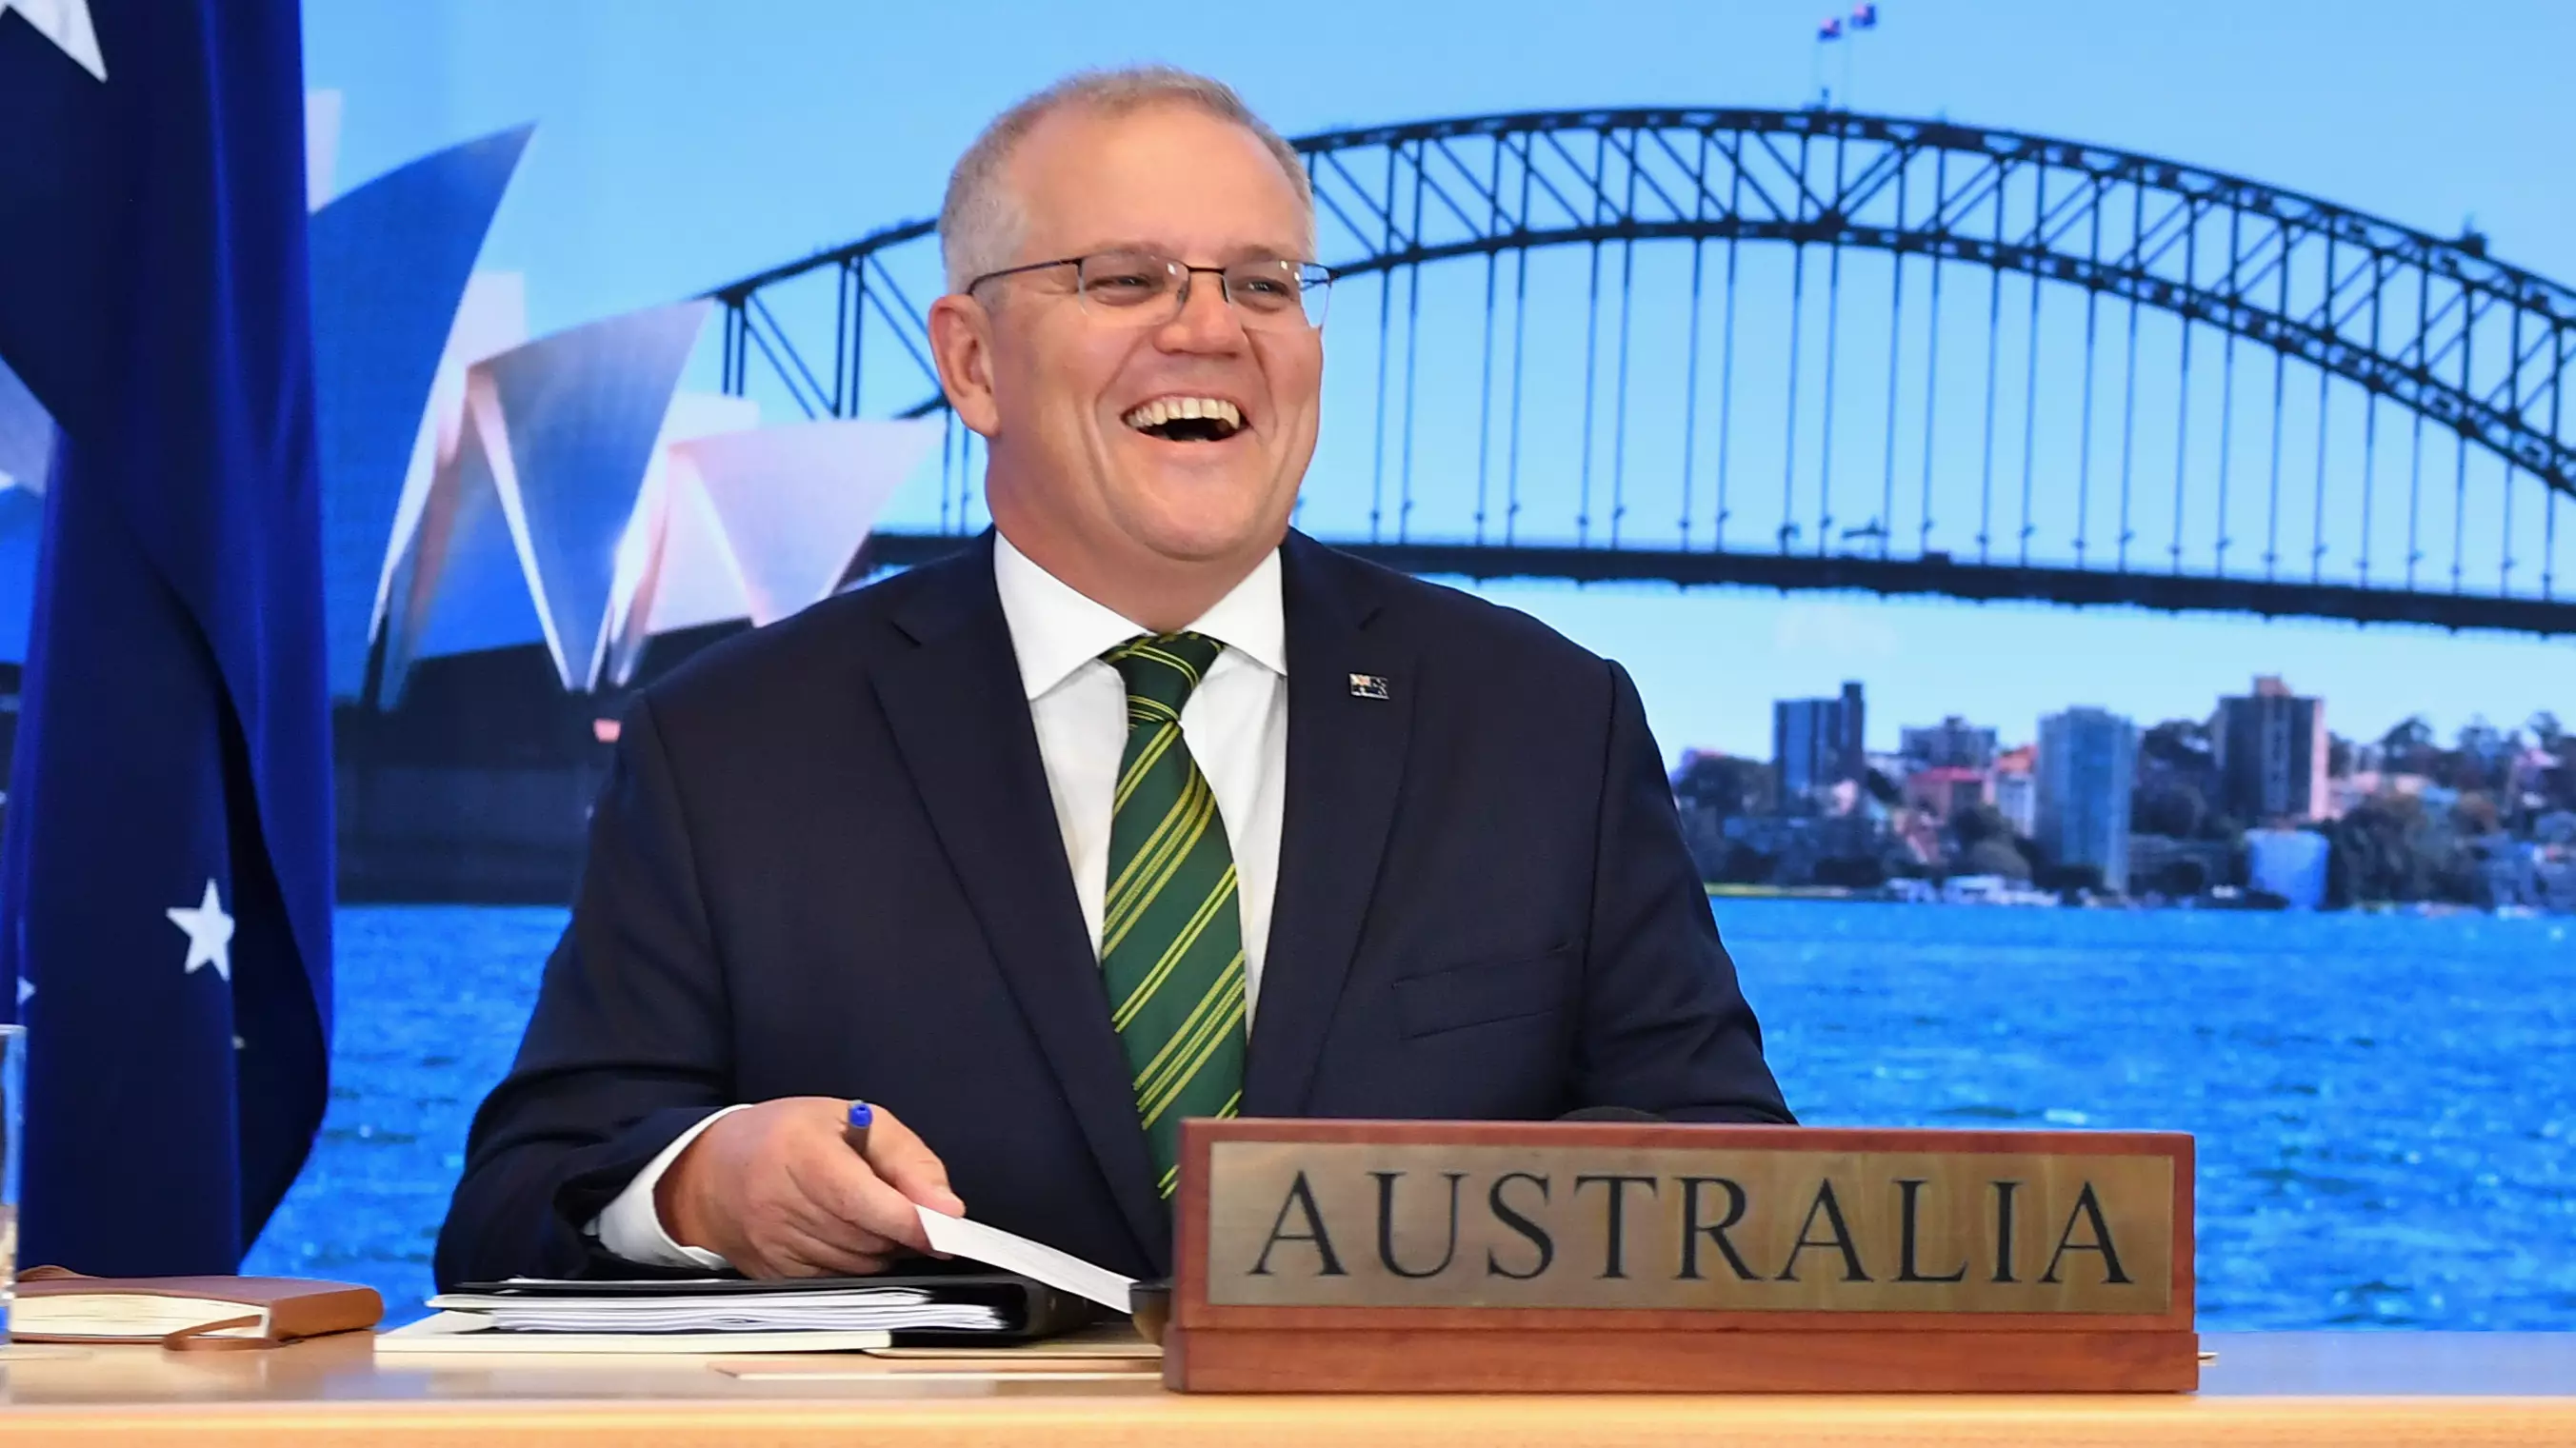 Scott Morrison Has Finally Said The Word 'Sorry' For The Vaccine Rollout